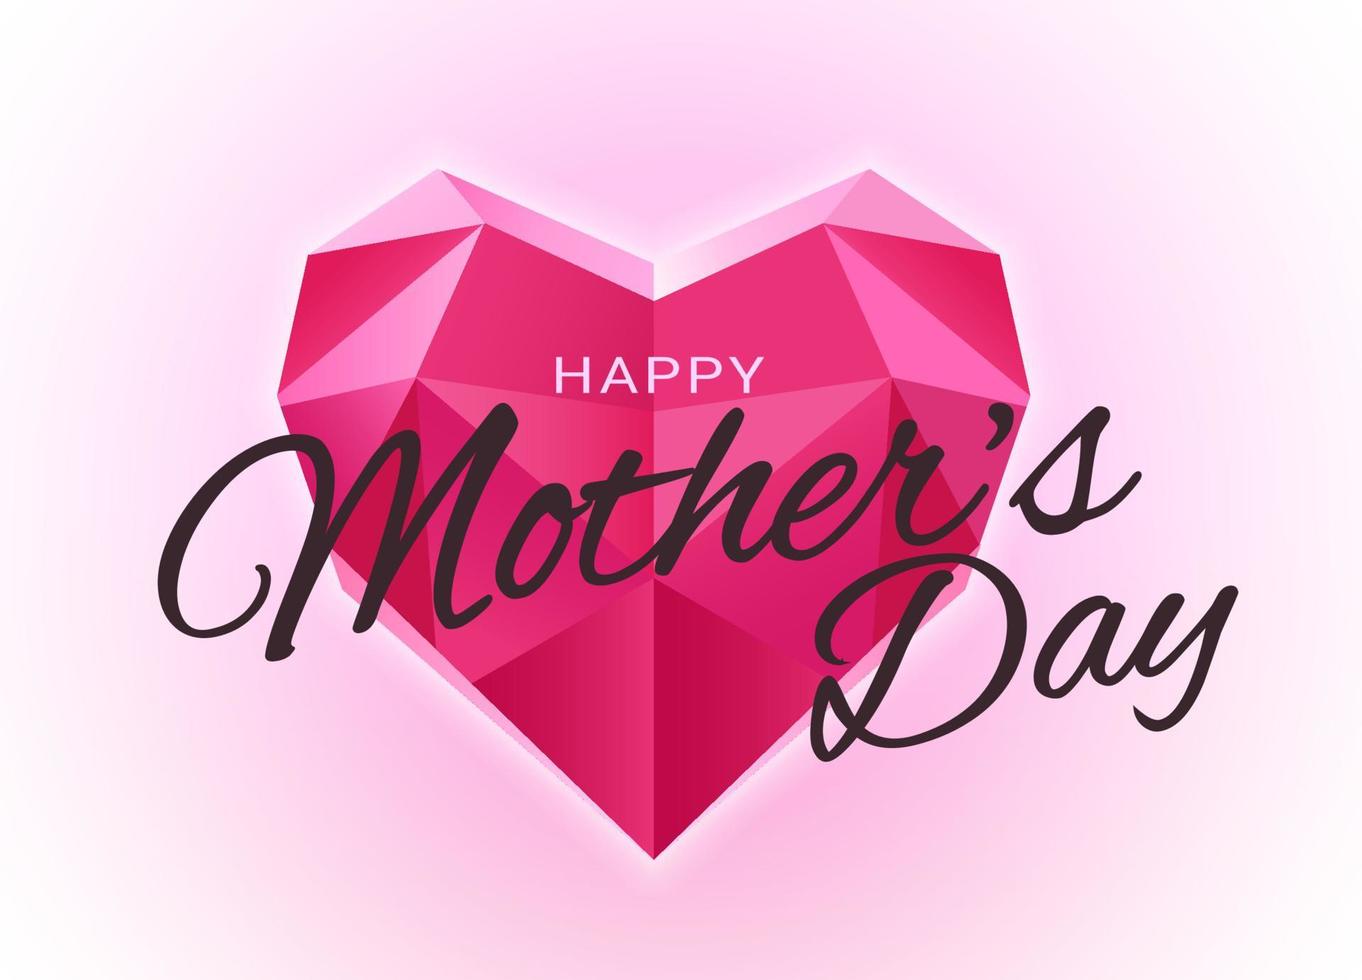 Happy mother's day with pink paper hearts symbol of love and text handwritten font on light pink background. vector